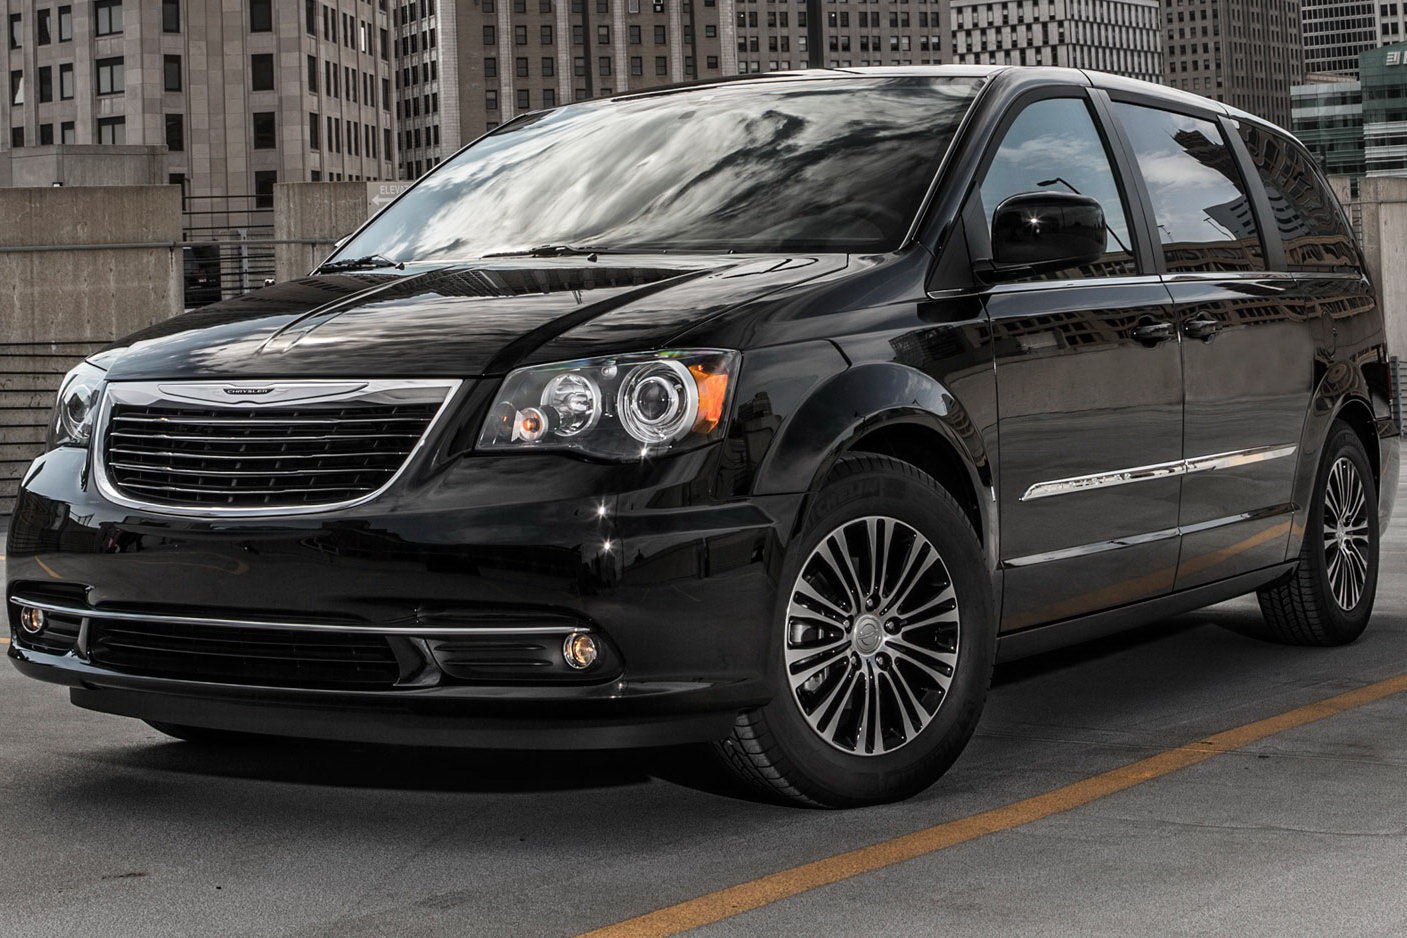 Chrysler town and country new model #1